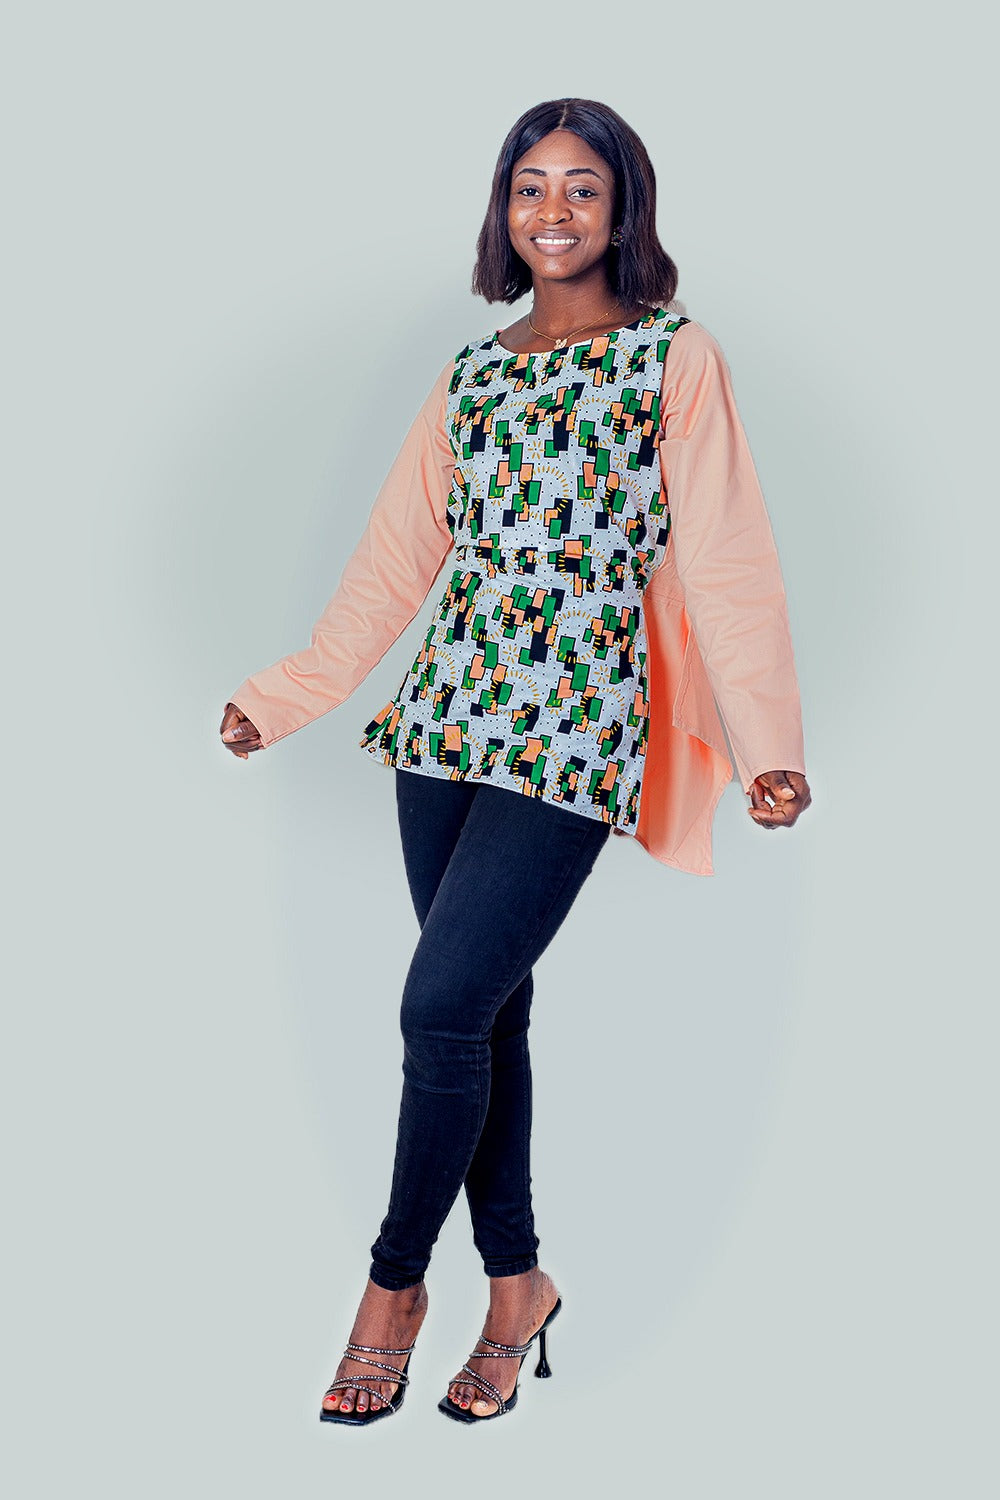 Michelle African Prints Butterfly Top